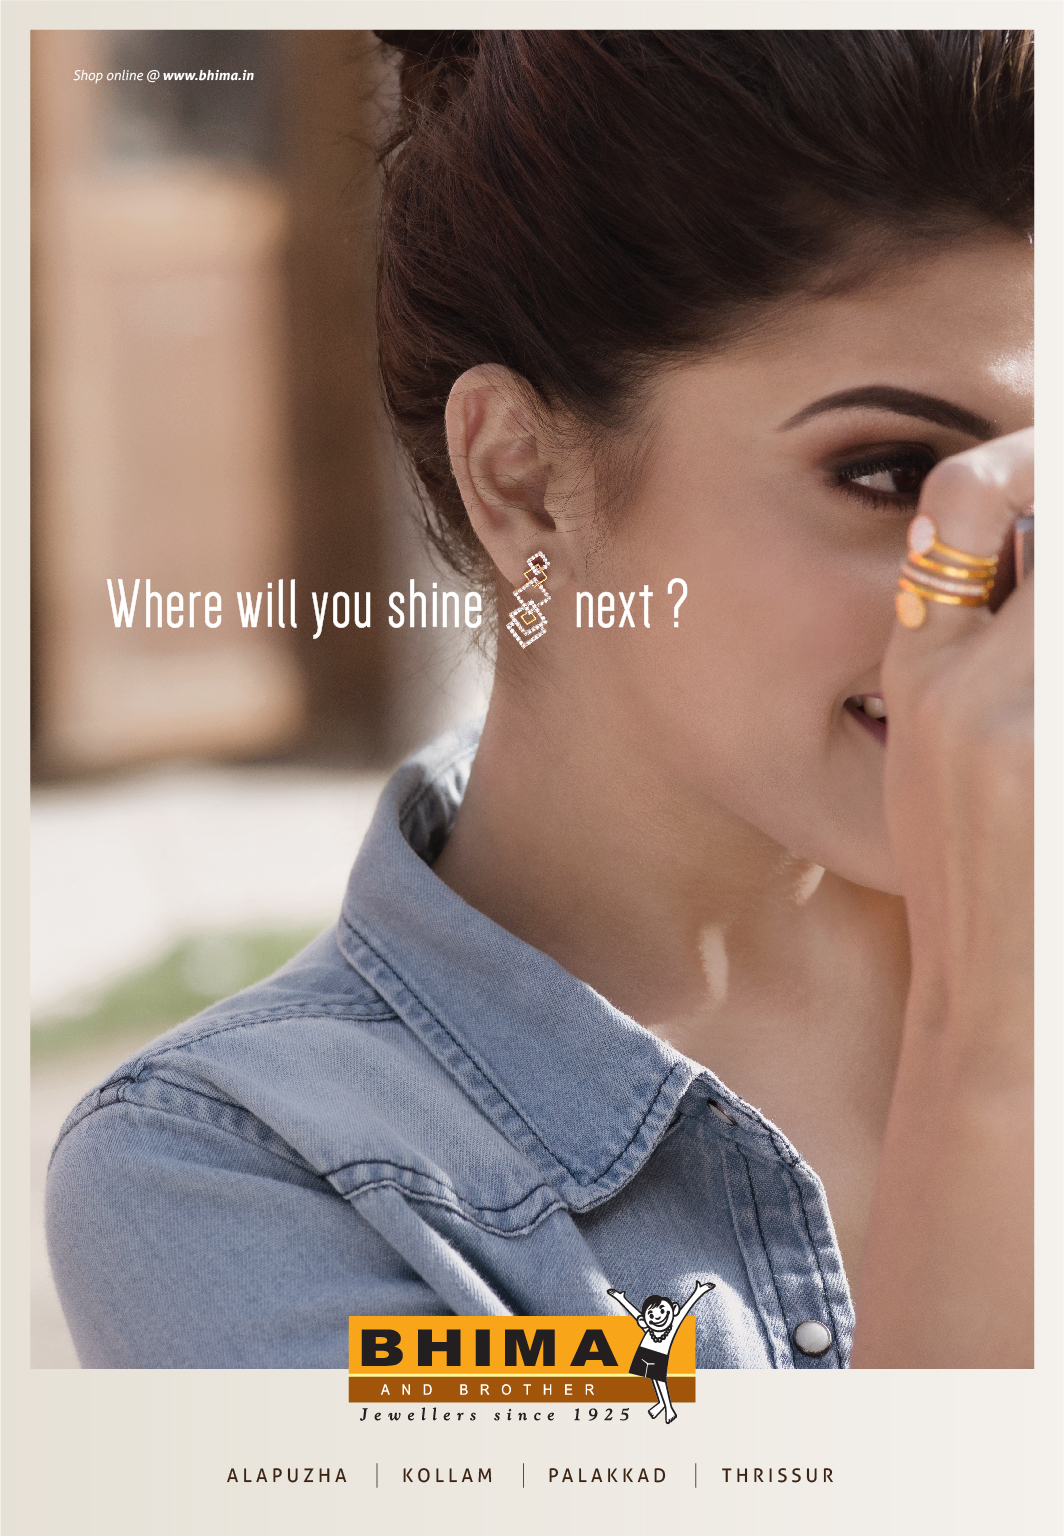 Where will you shine next by Bhima Jewellers | Print mock-up 4 by Stark Communications Pvt Ltd